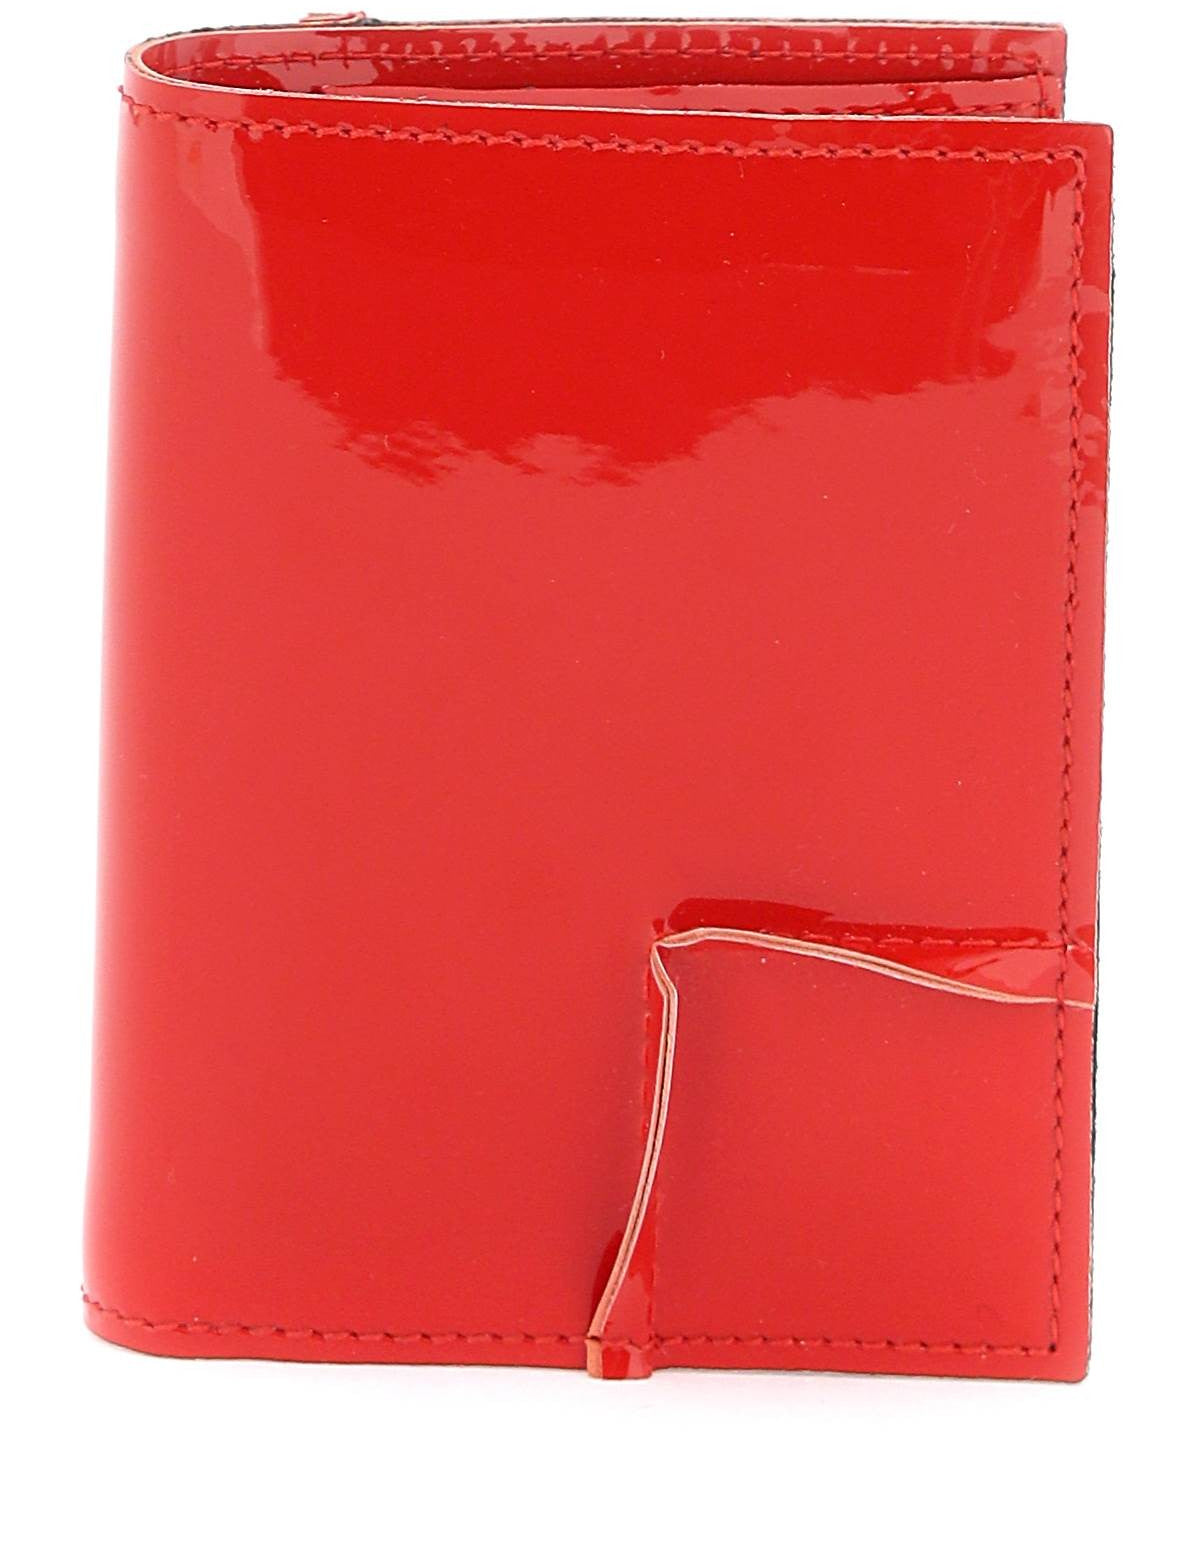 comme-des-garcons-wallet-bifold-patent-leather-wallet-in.jpg